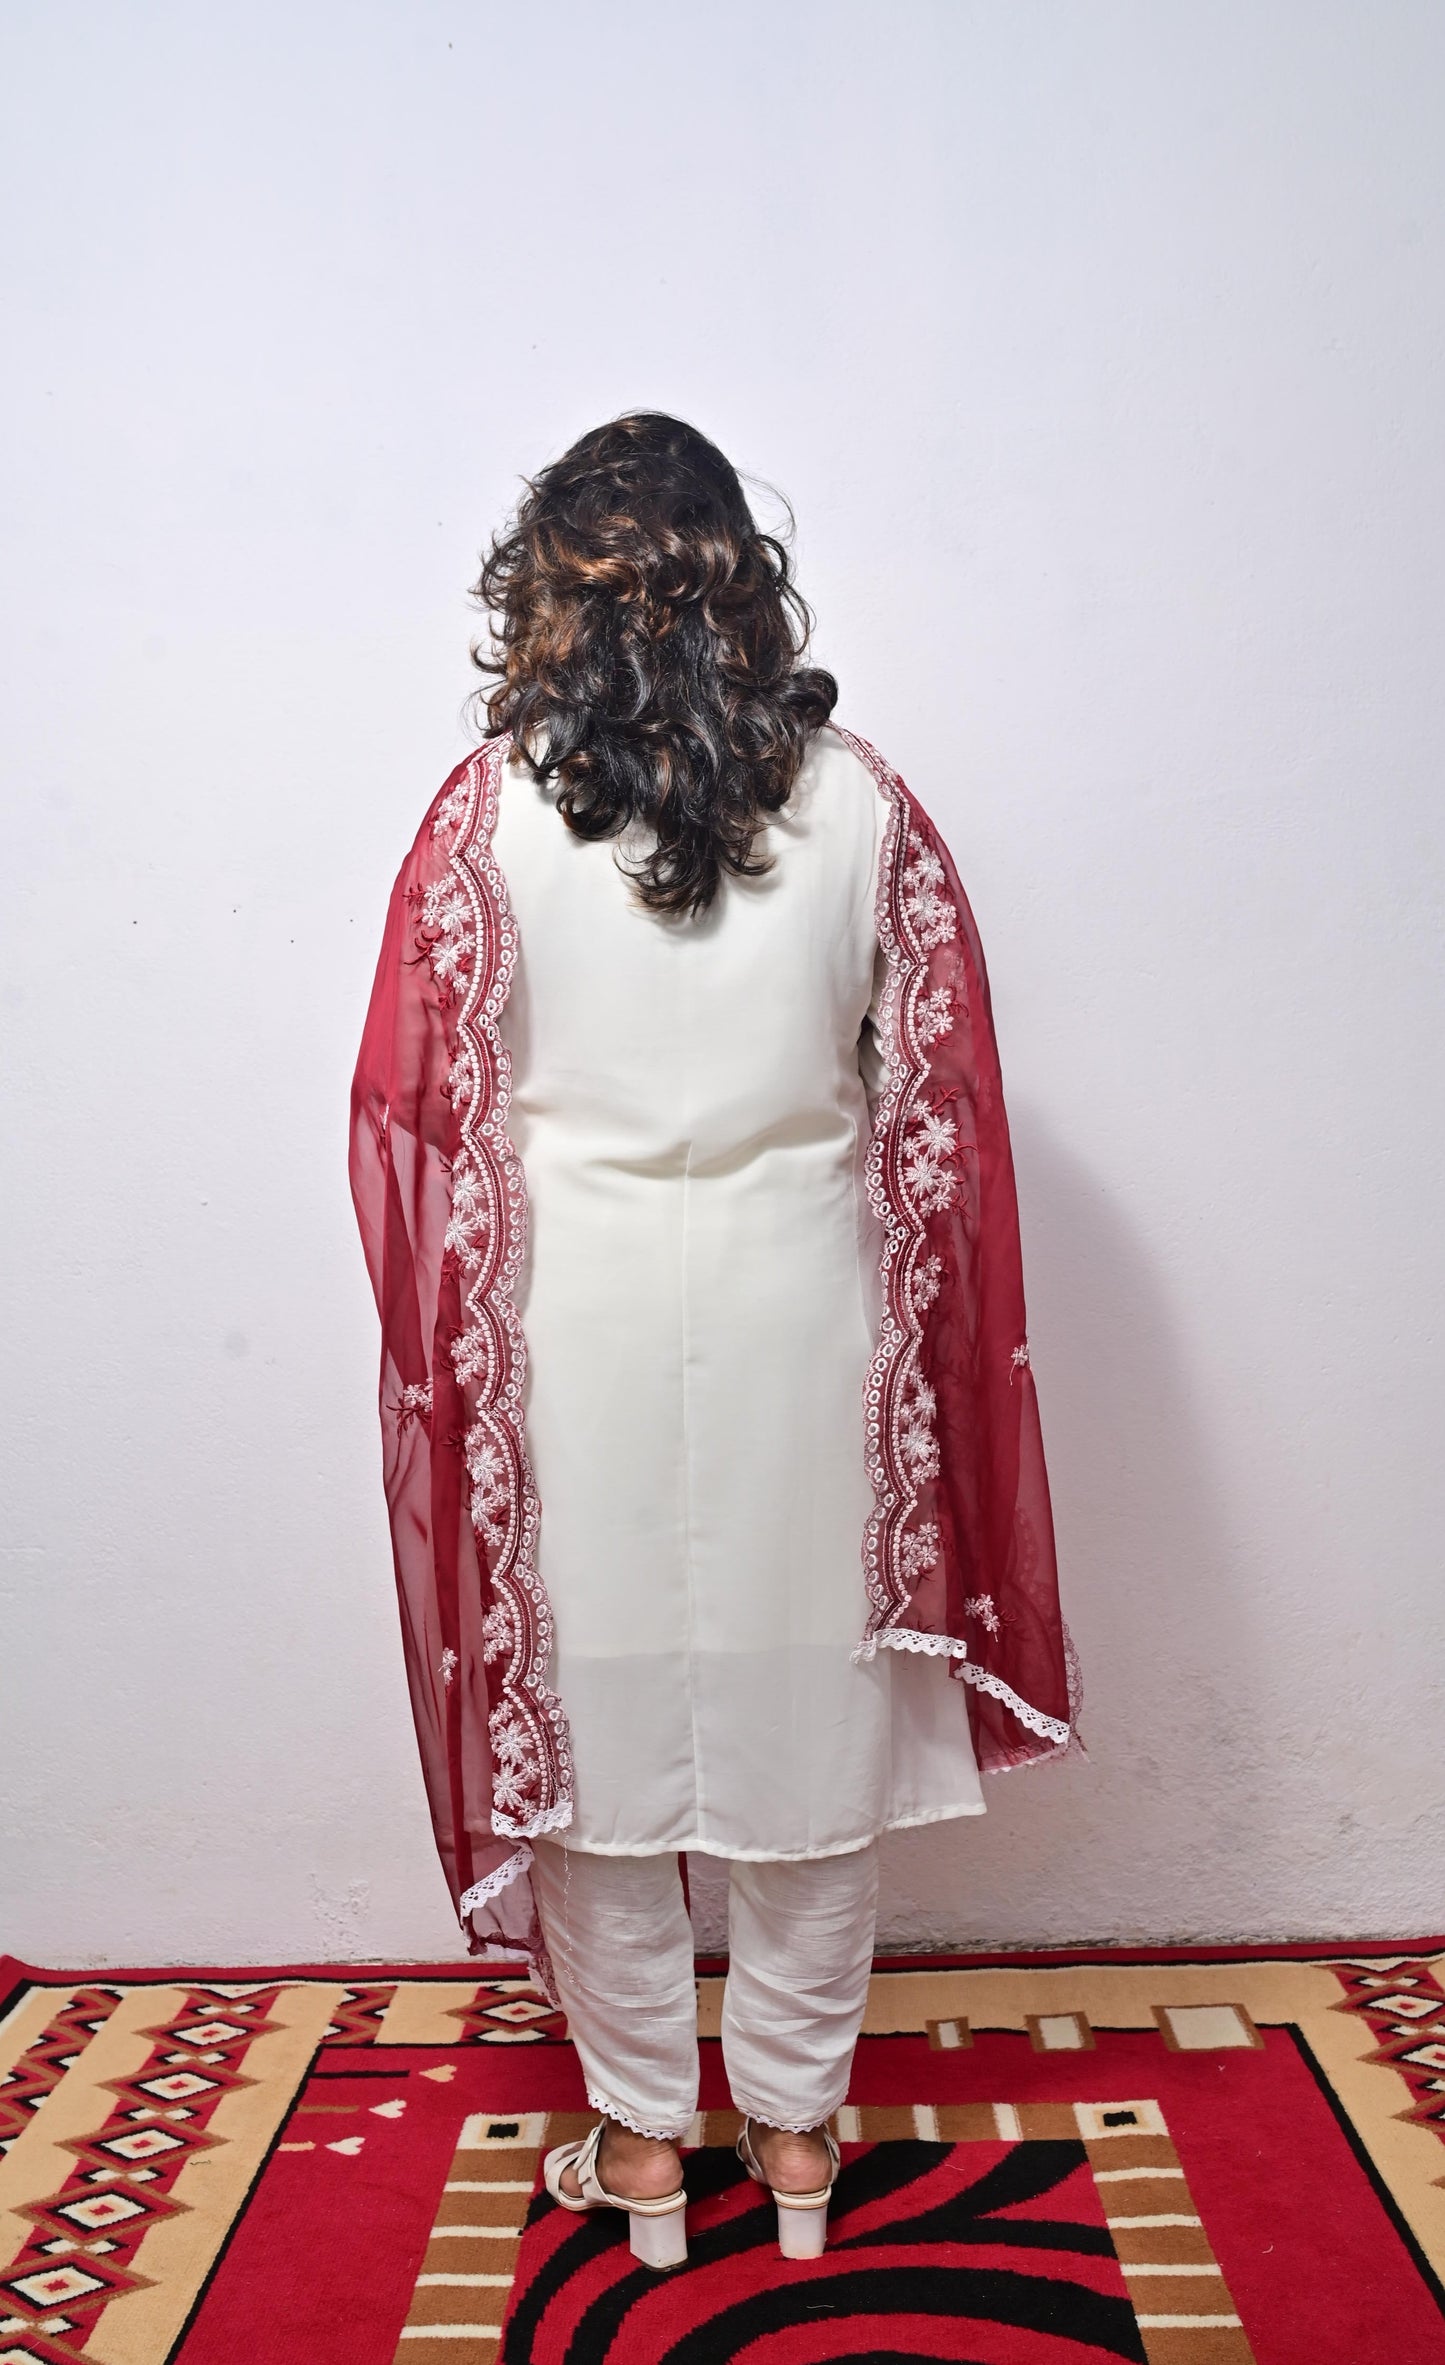 White Georgette embroidery with Maroon Organza Dupatta